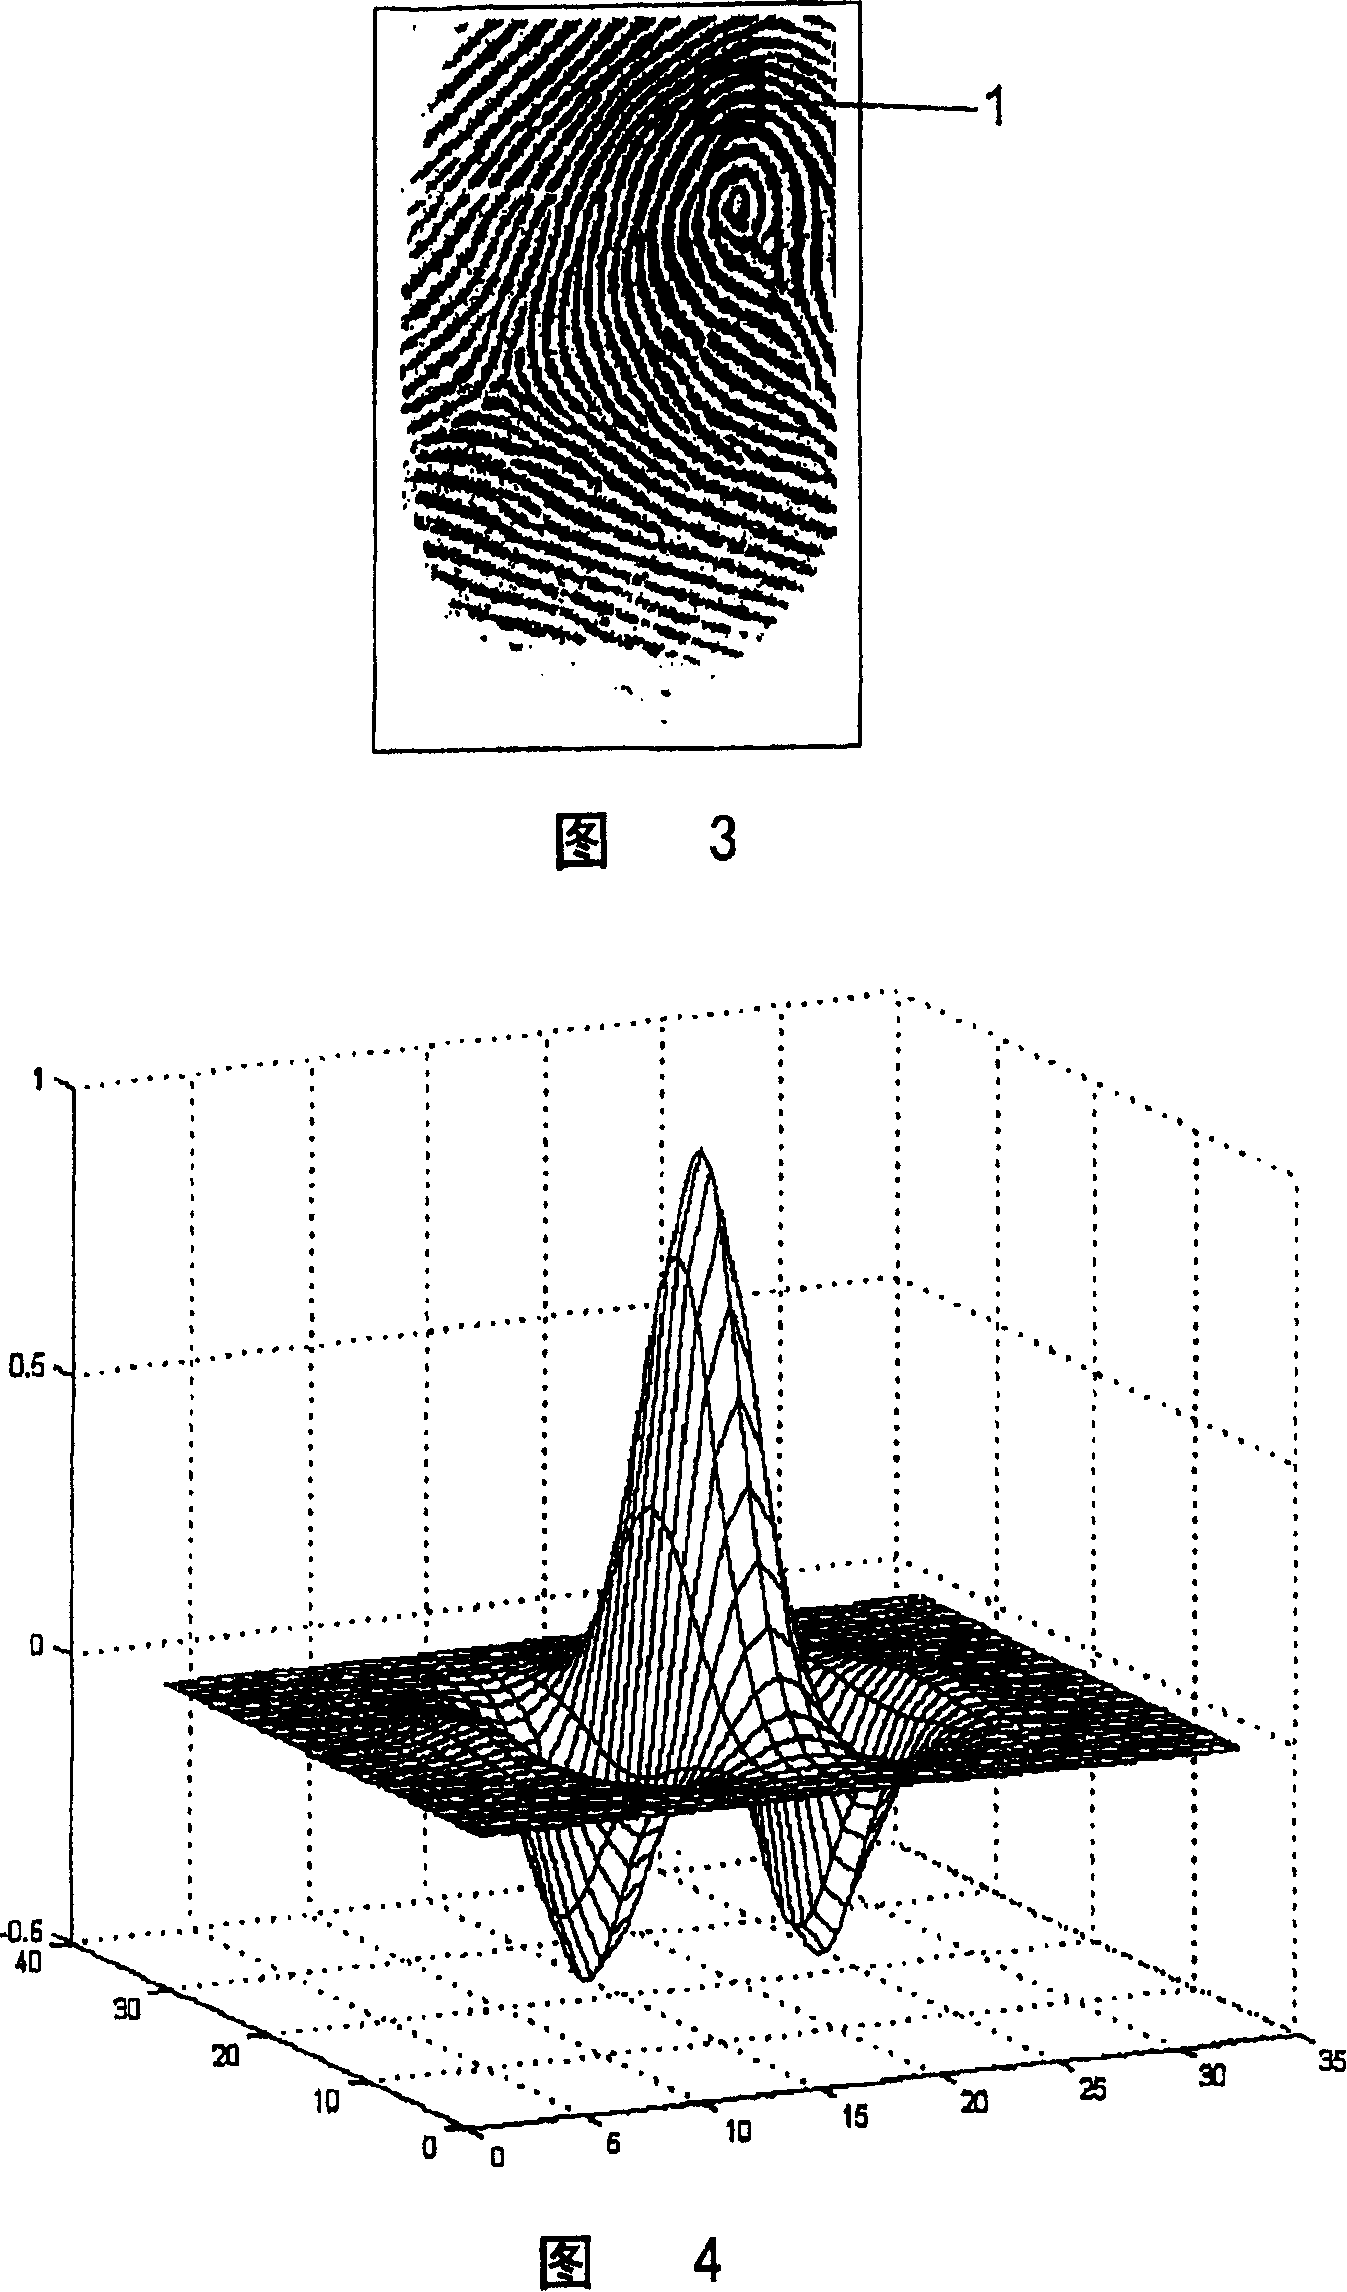 Method of filtering an image with bar-shaped structures